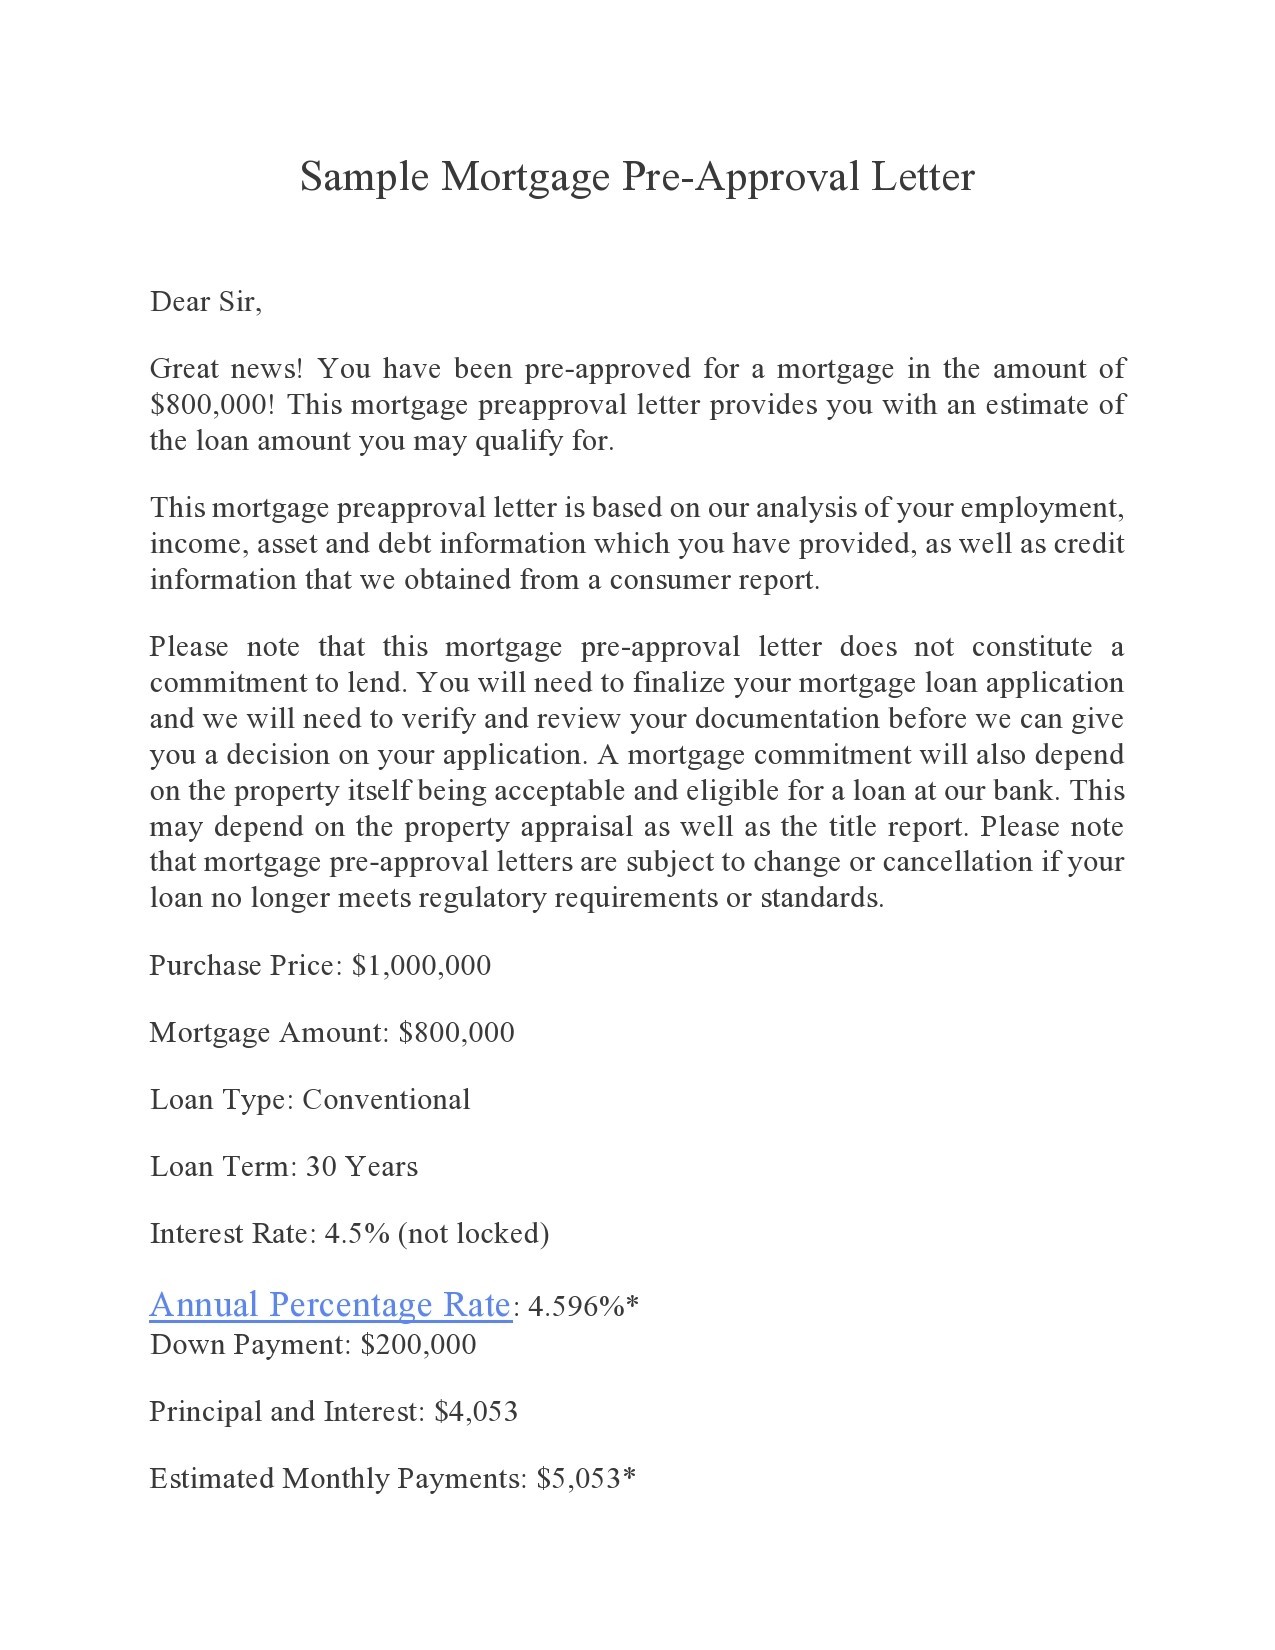 Free pre approval letter 22